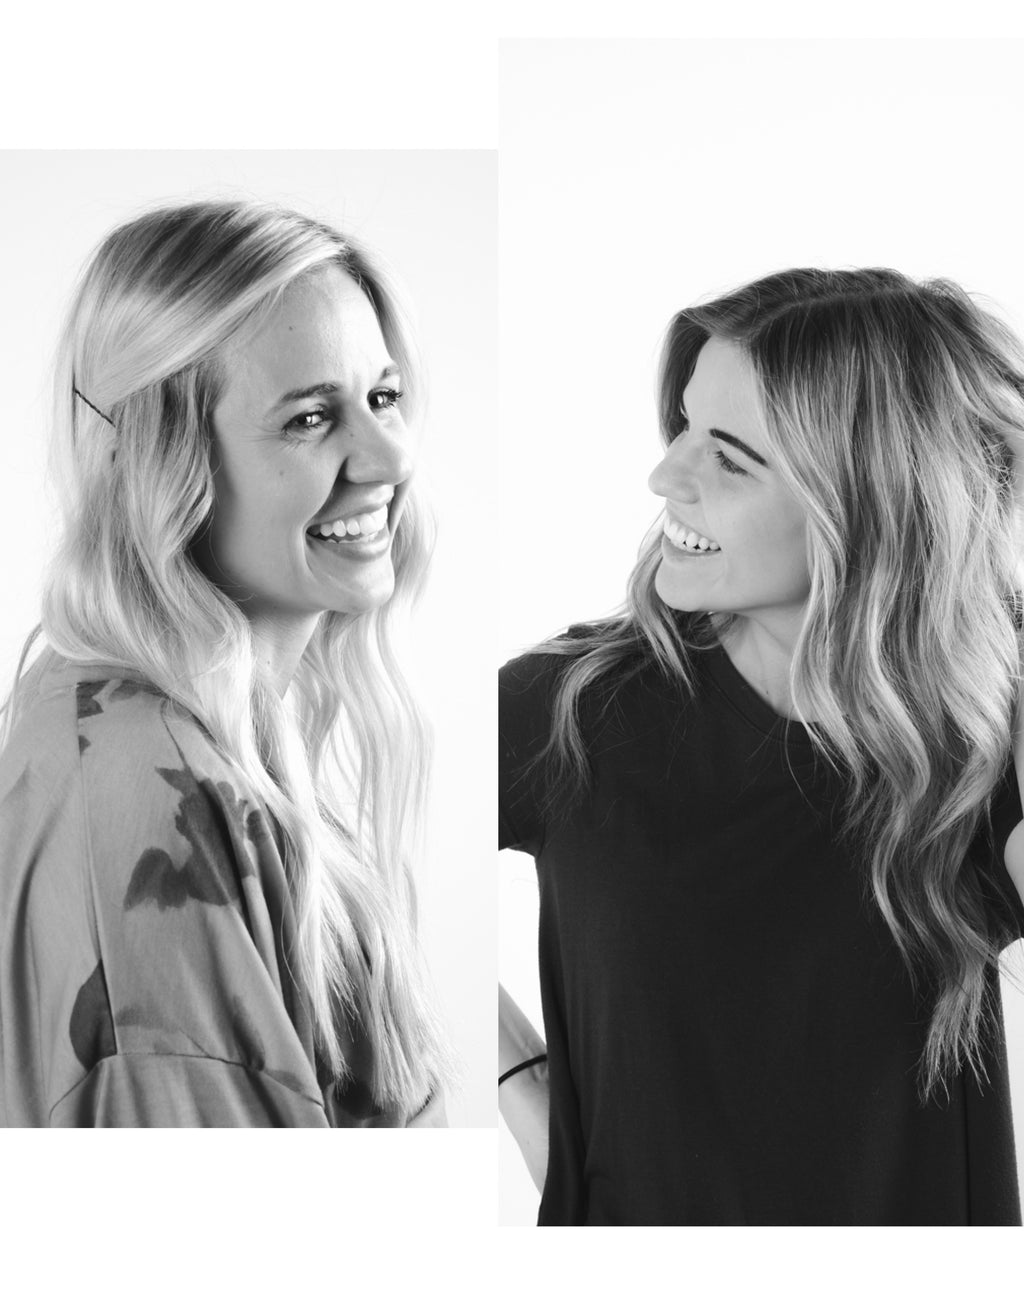 Staff Introduction: Brittany & Lindsay